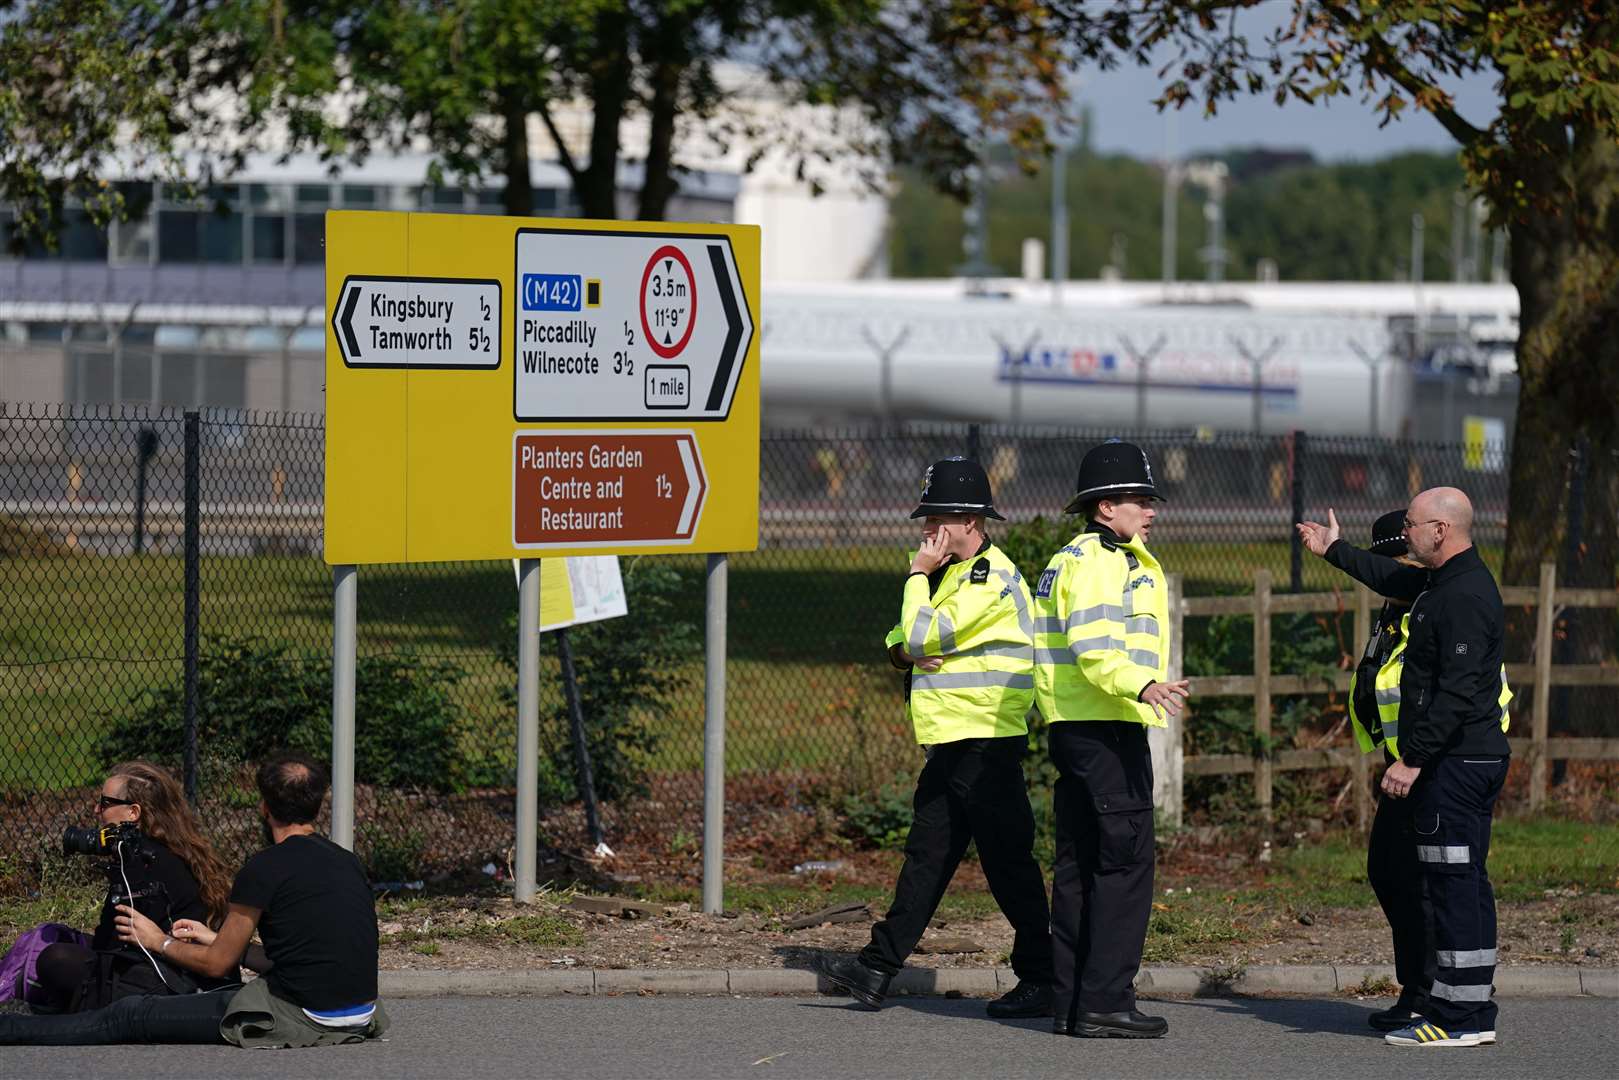 Police officers at the Just Stop Oil protest which blocked the entrance to the Kingsbury Oil Terminal near Birmingham on September 14 (Joe Giddens/PA)